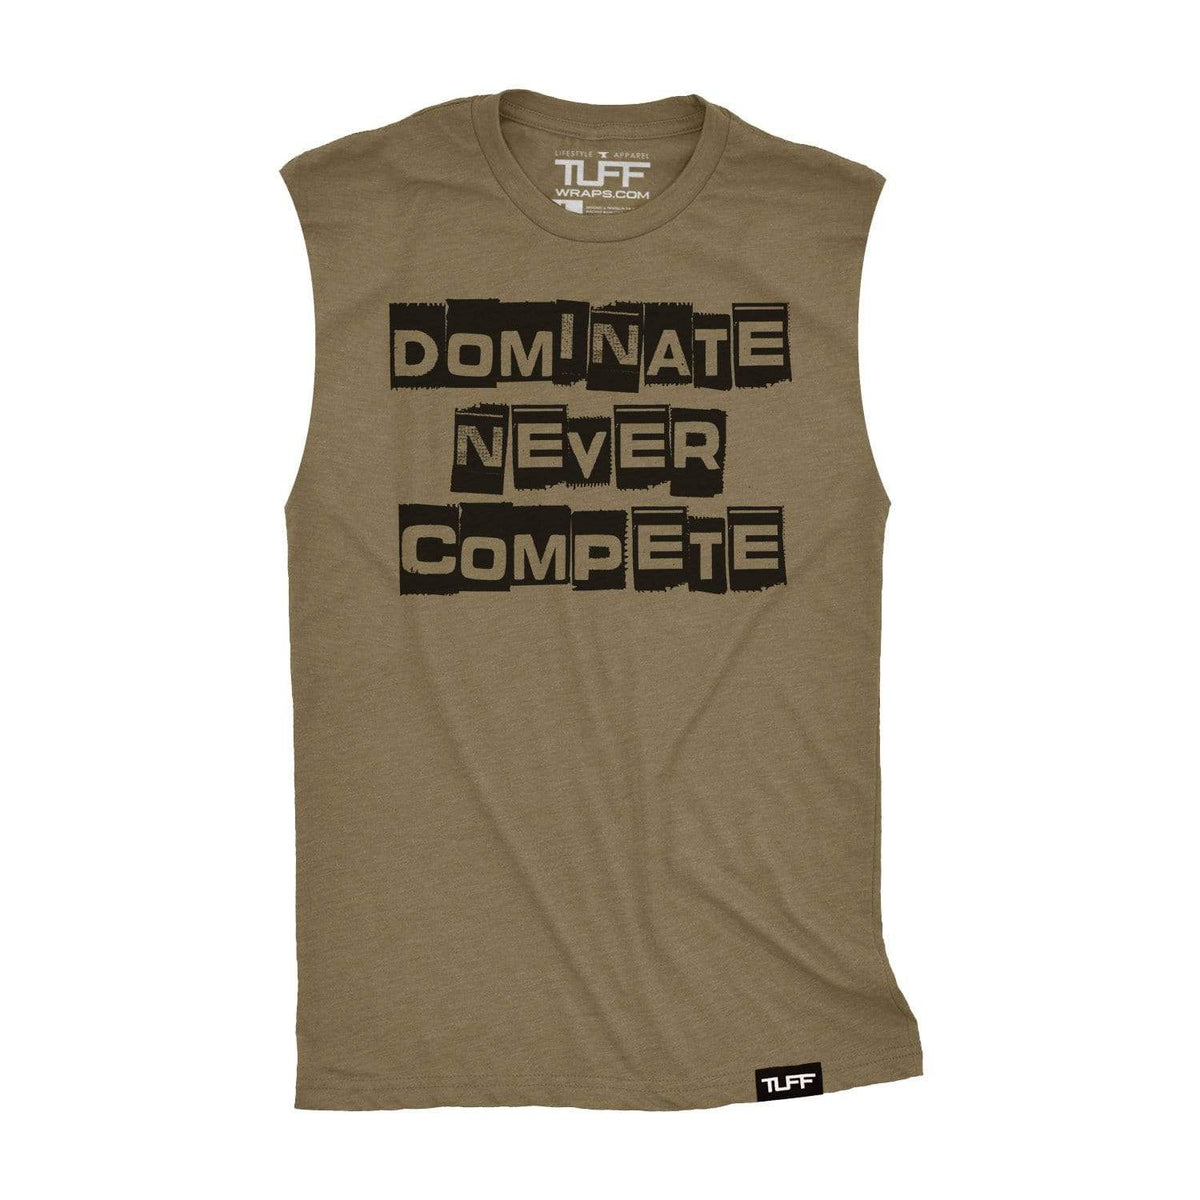 Dominate Never Compete Raw Edge Muscle Tank S / Military Green TuffWraps.com